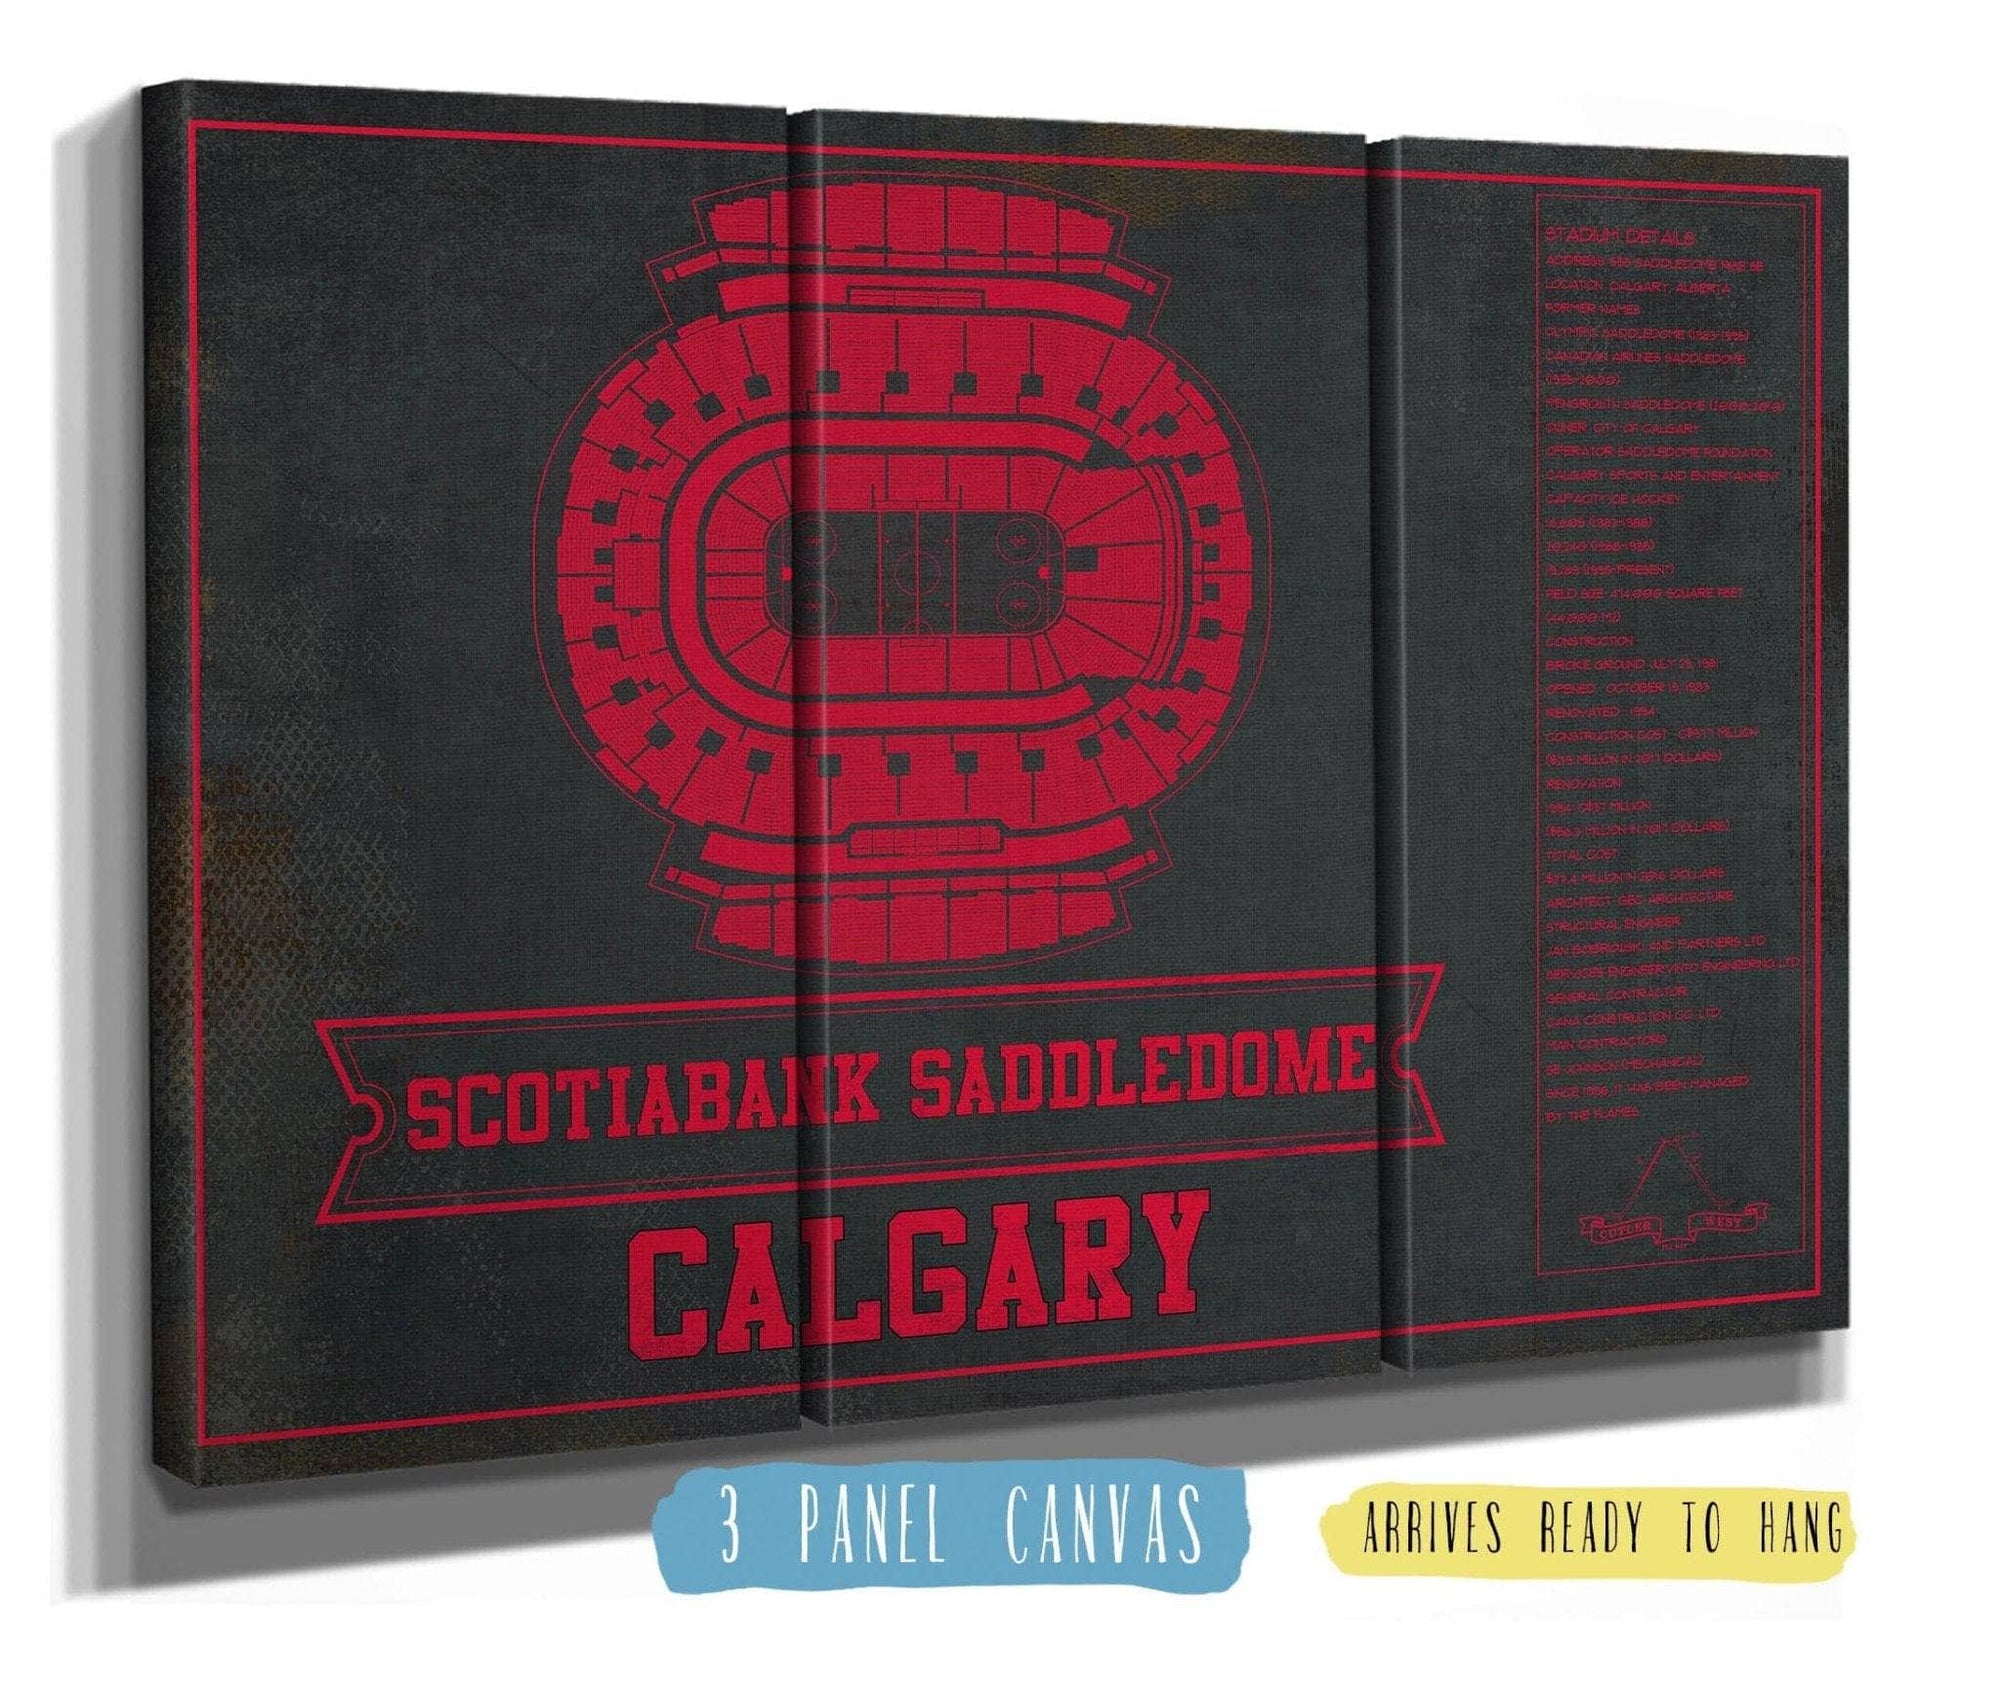 Cutler West 48" x 32" / 3 Panel Canvas Wrap Calgary Flames Scotiabank Saddledome Seating Chart - Vintage Hockey Team Color Print 673818887-TEAM